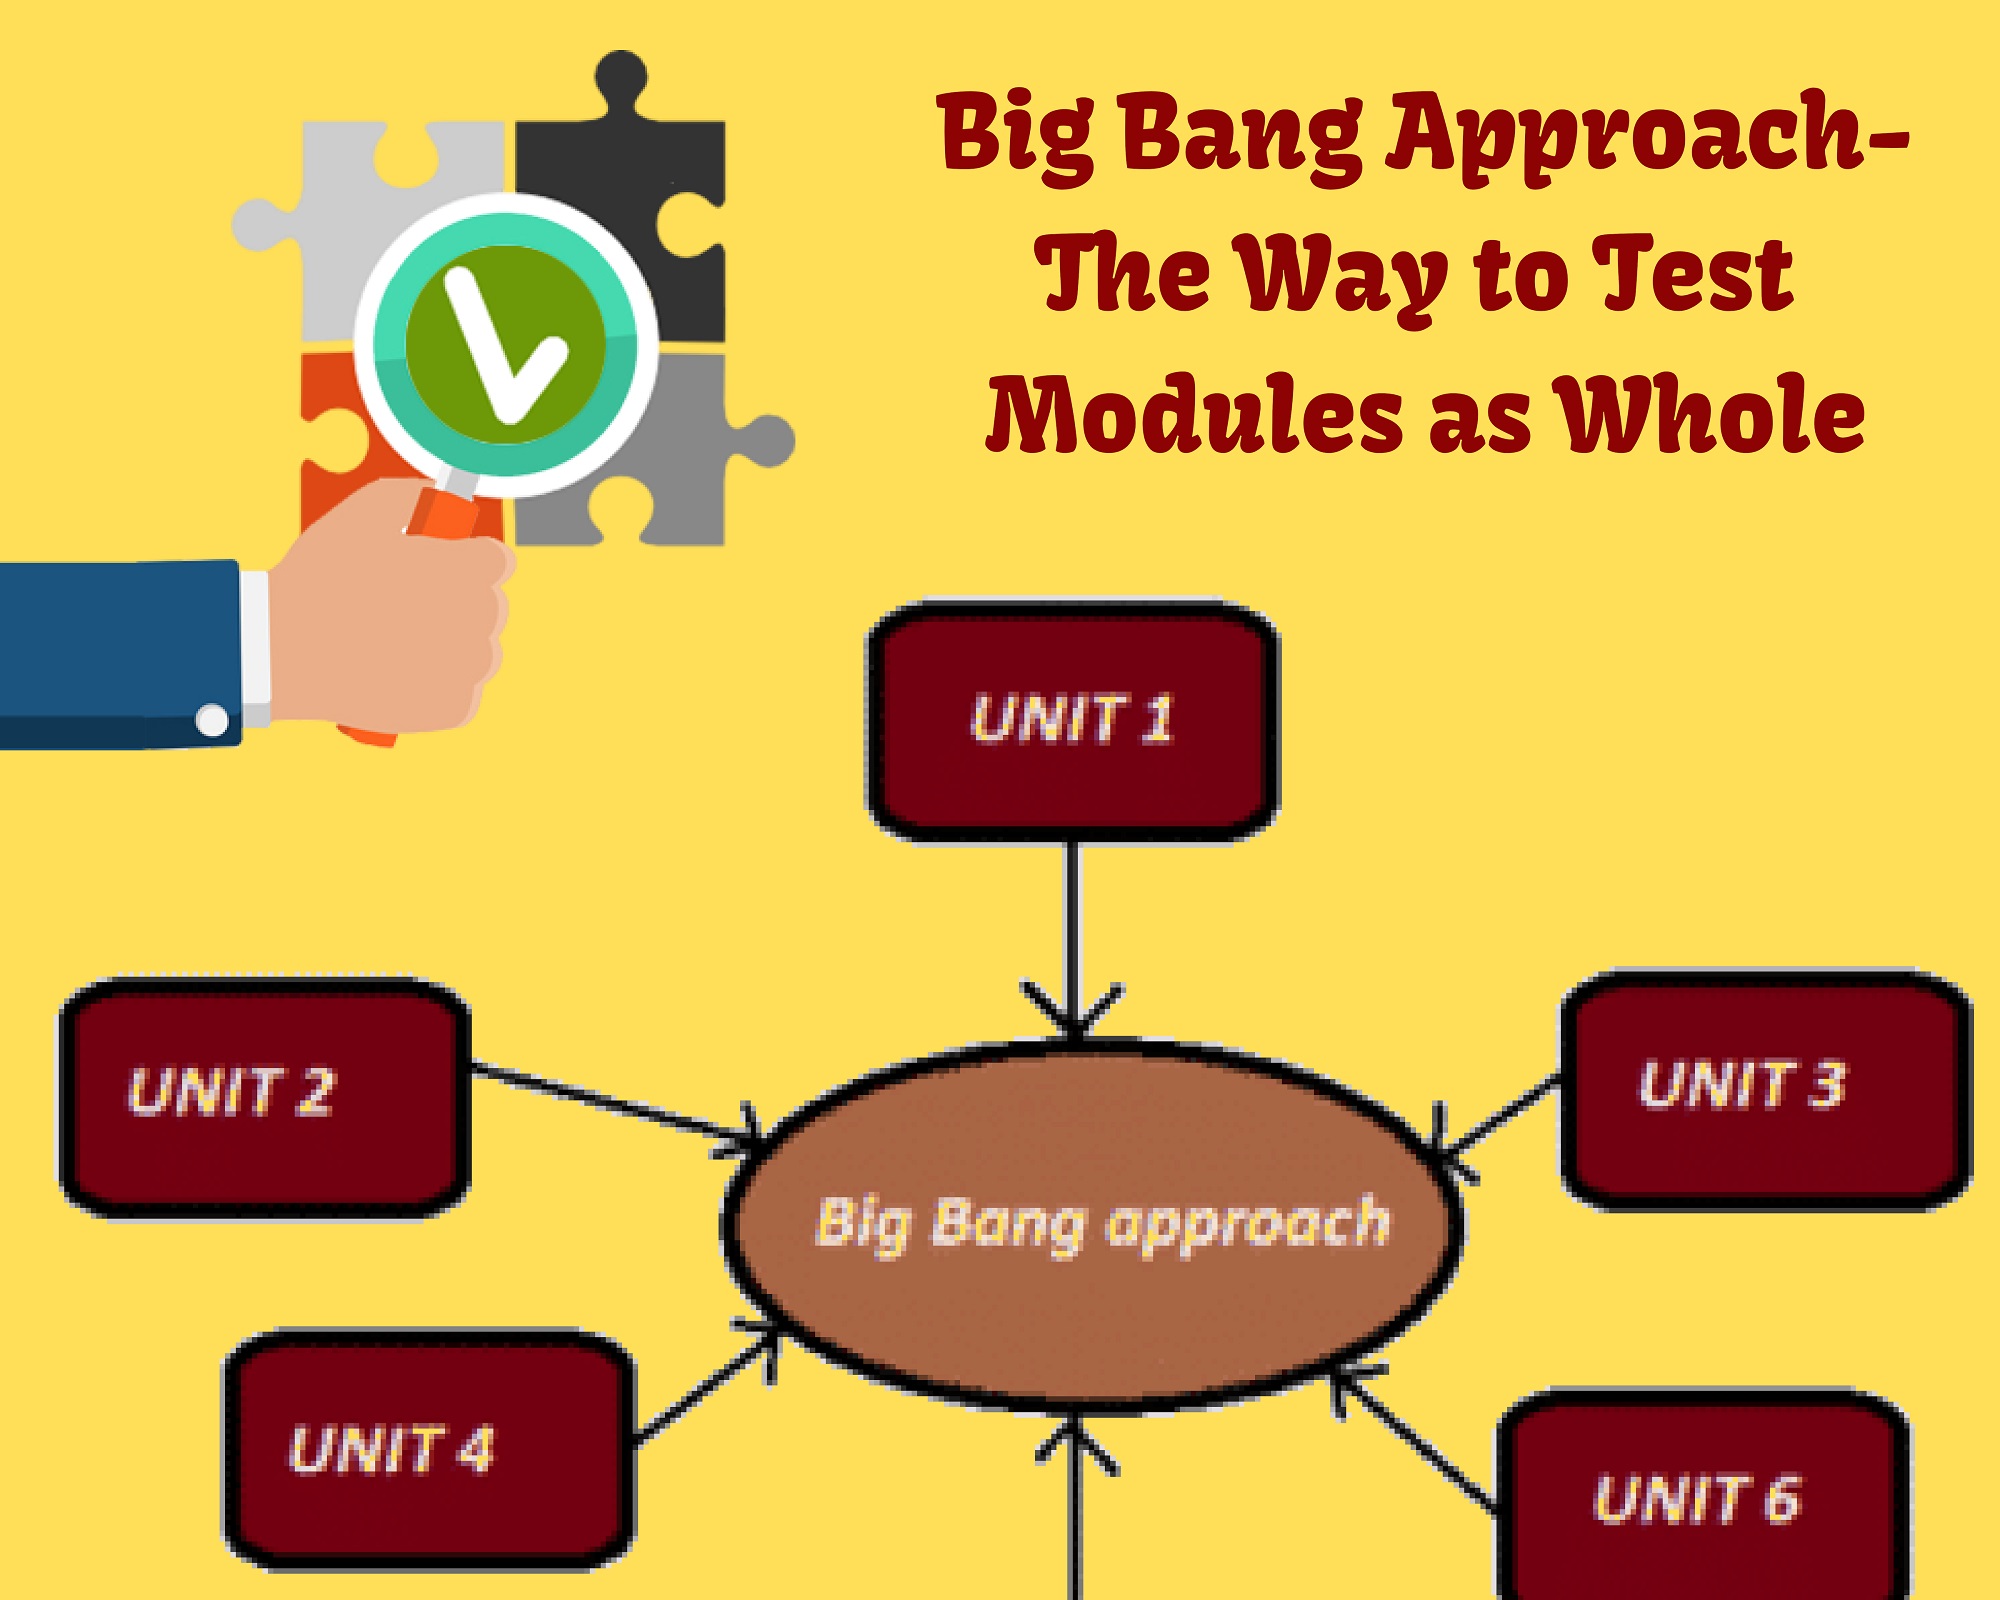 Big Bang Approach-The Way to Test Modules as Whole